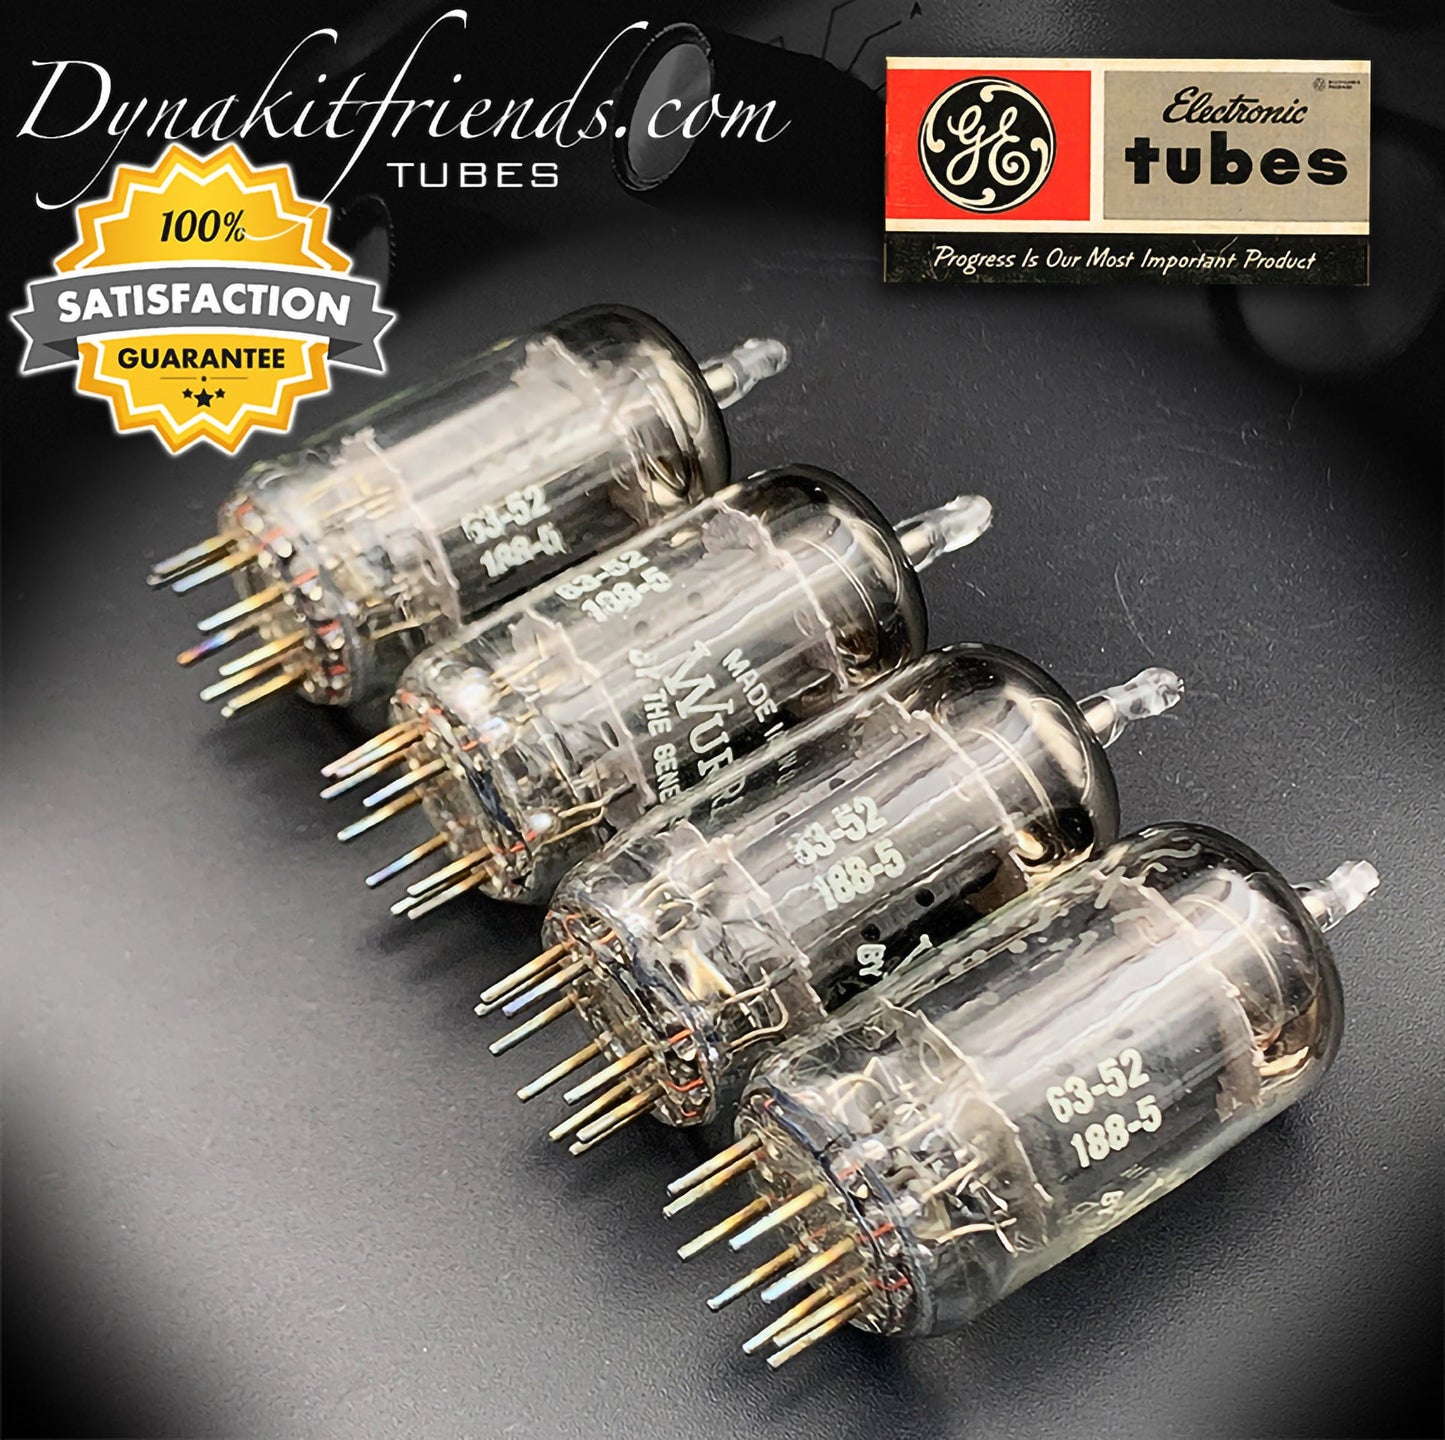 12AX7 ( ECC83 ) GE labeled Wurlitzer Long Gray Plates O Getter Matched Tubes MADE IN USA '63 - Vacuum Tubes Treasures